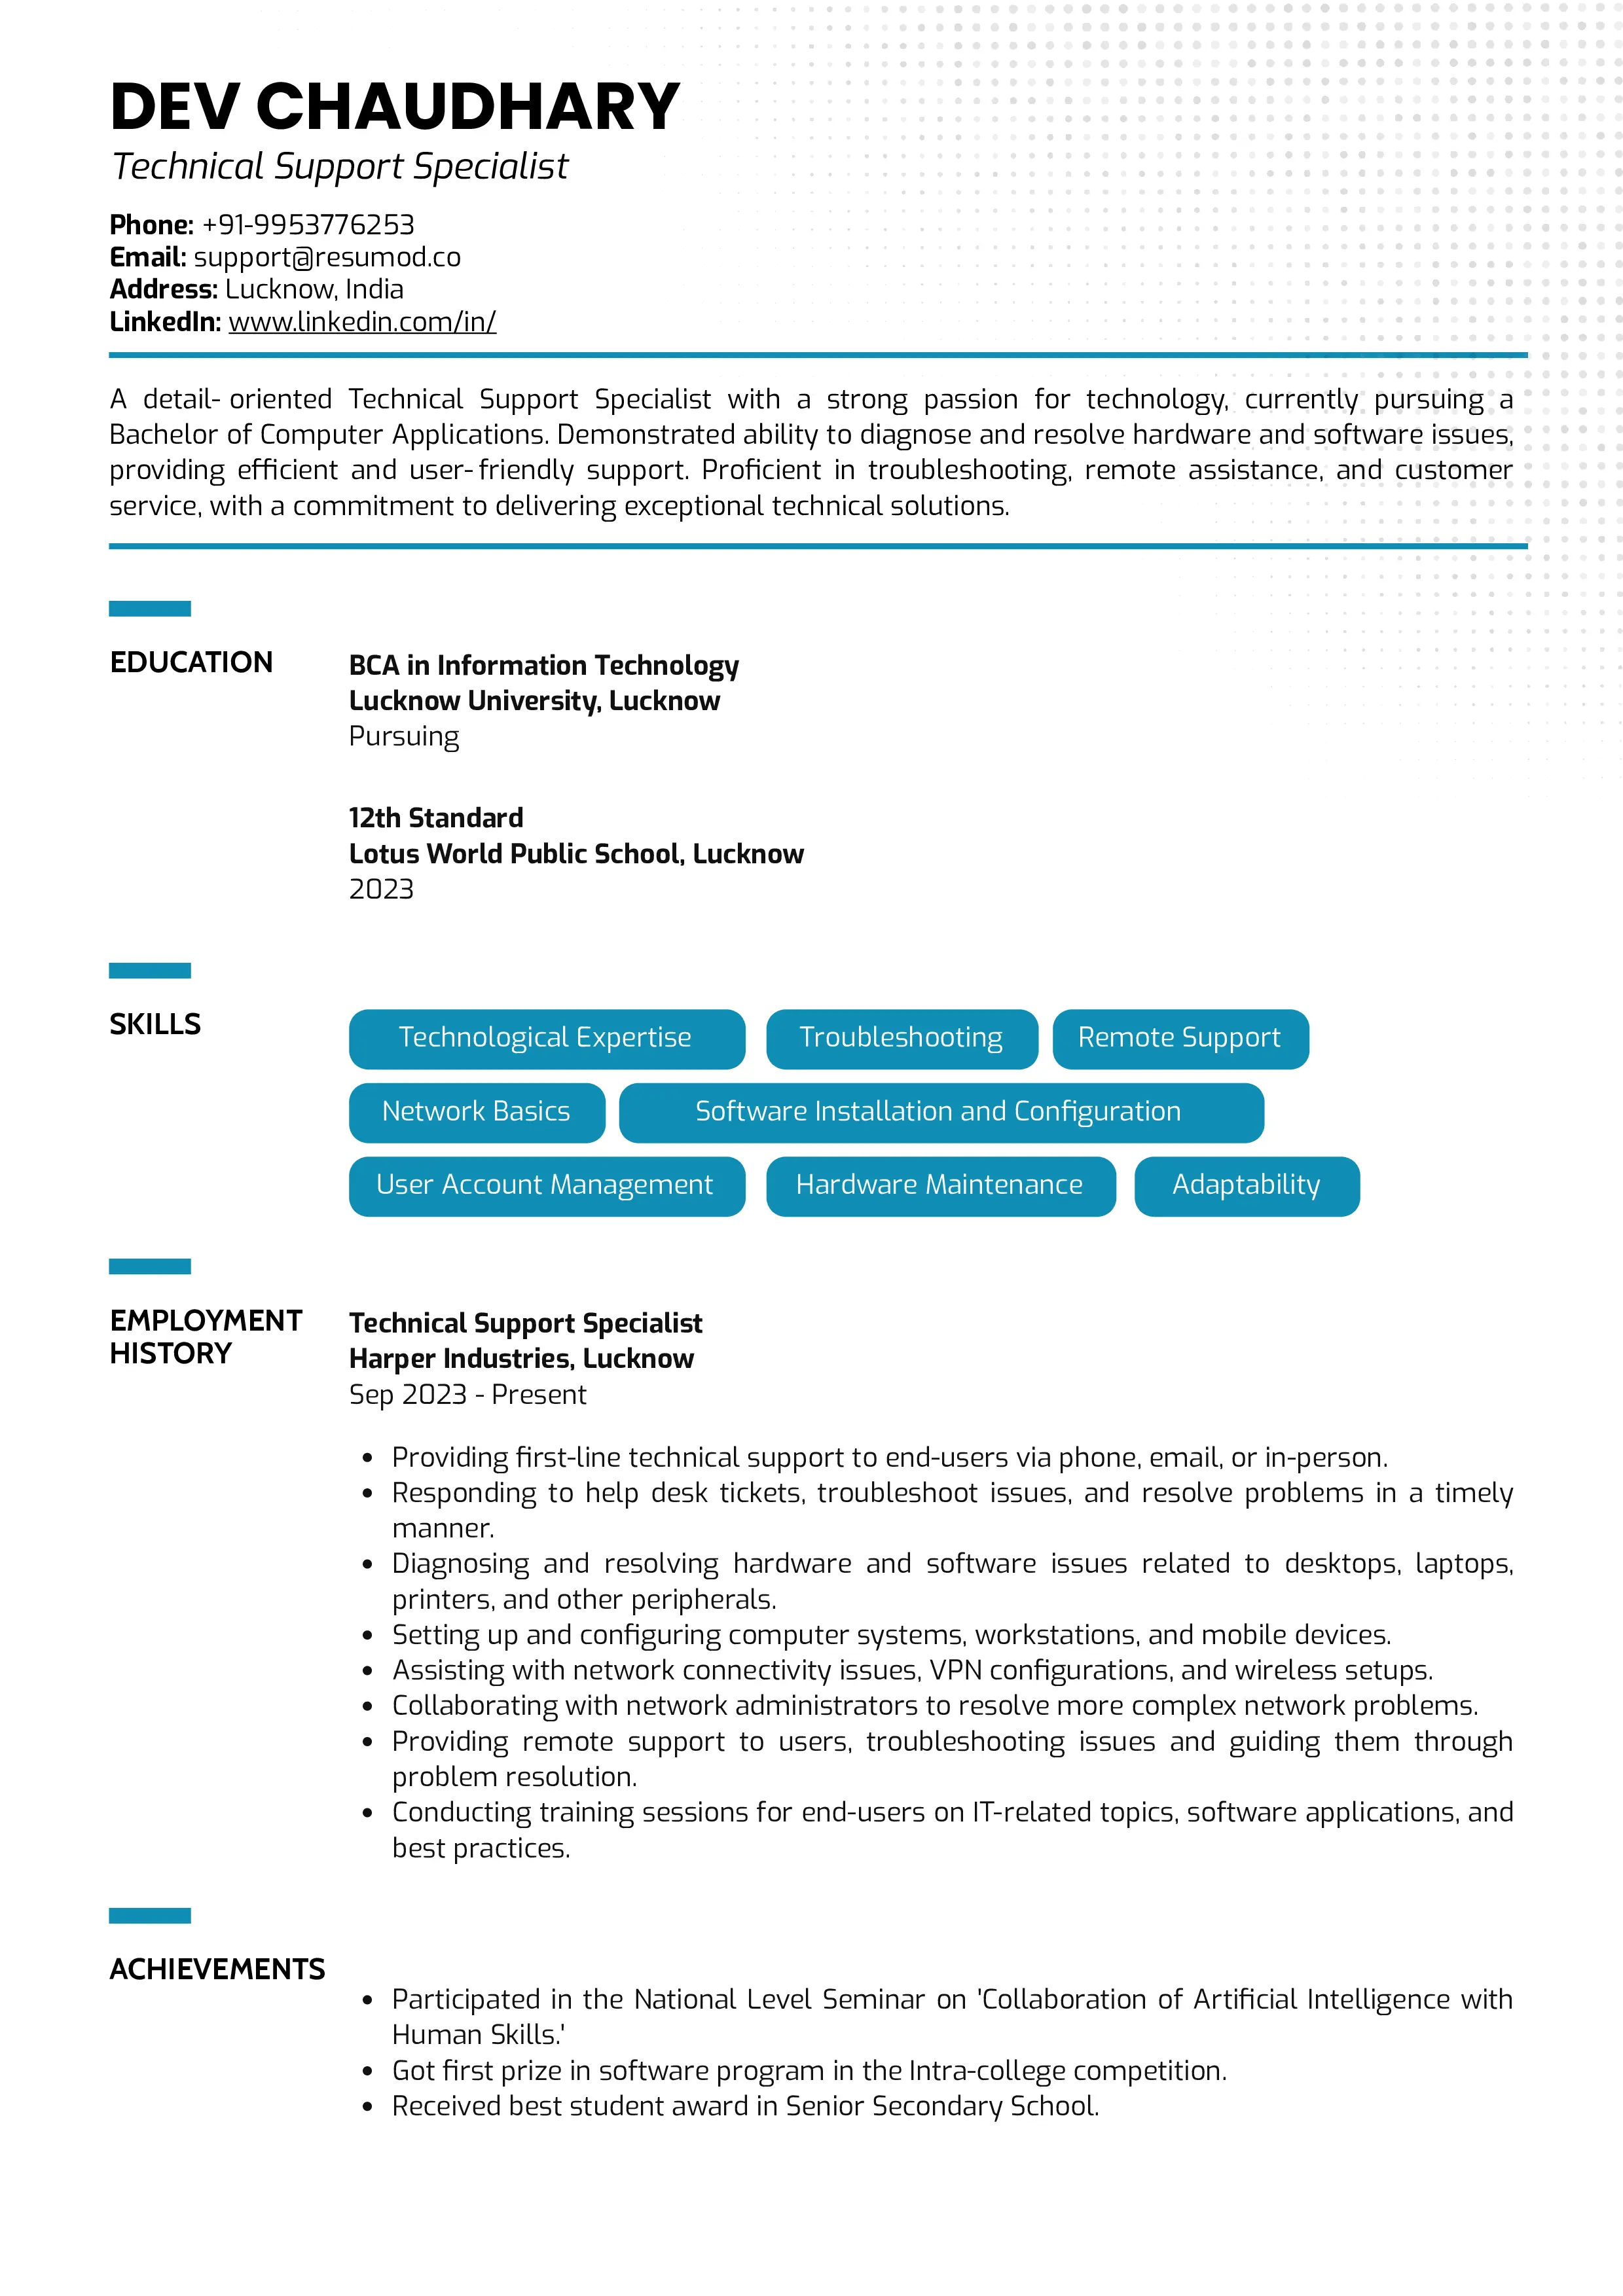 Sample Resume of Technical Support Specialist | Free Resume Templates & Samples on Resumod.co